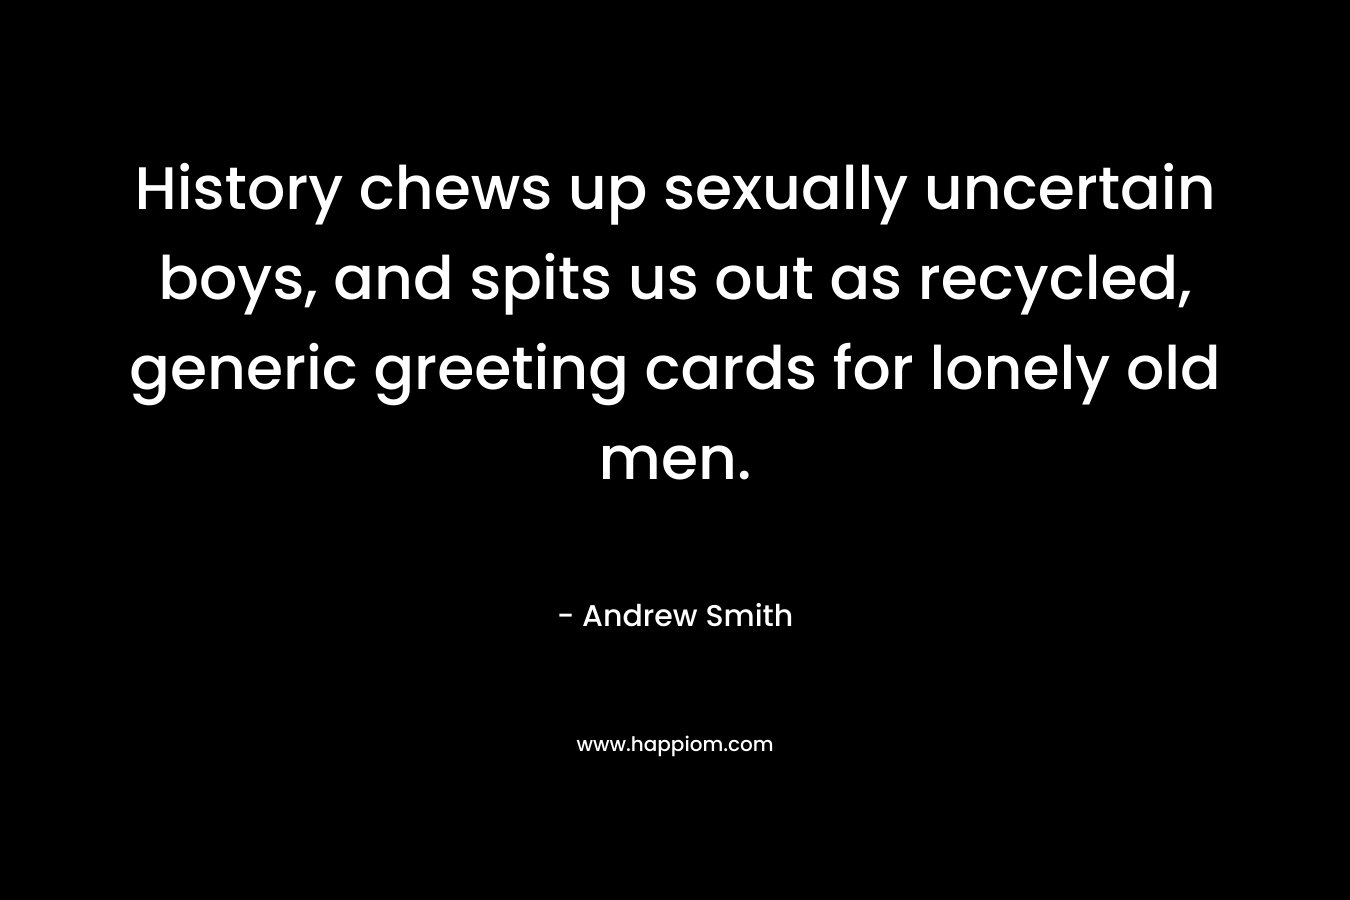 History chews up sexually uncertain boys, and spits us out as recycled, generic greeting cards for lonely old men.